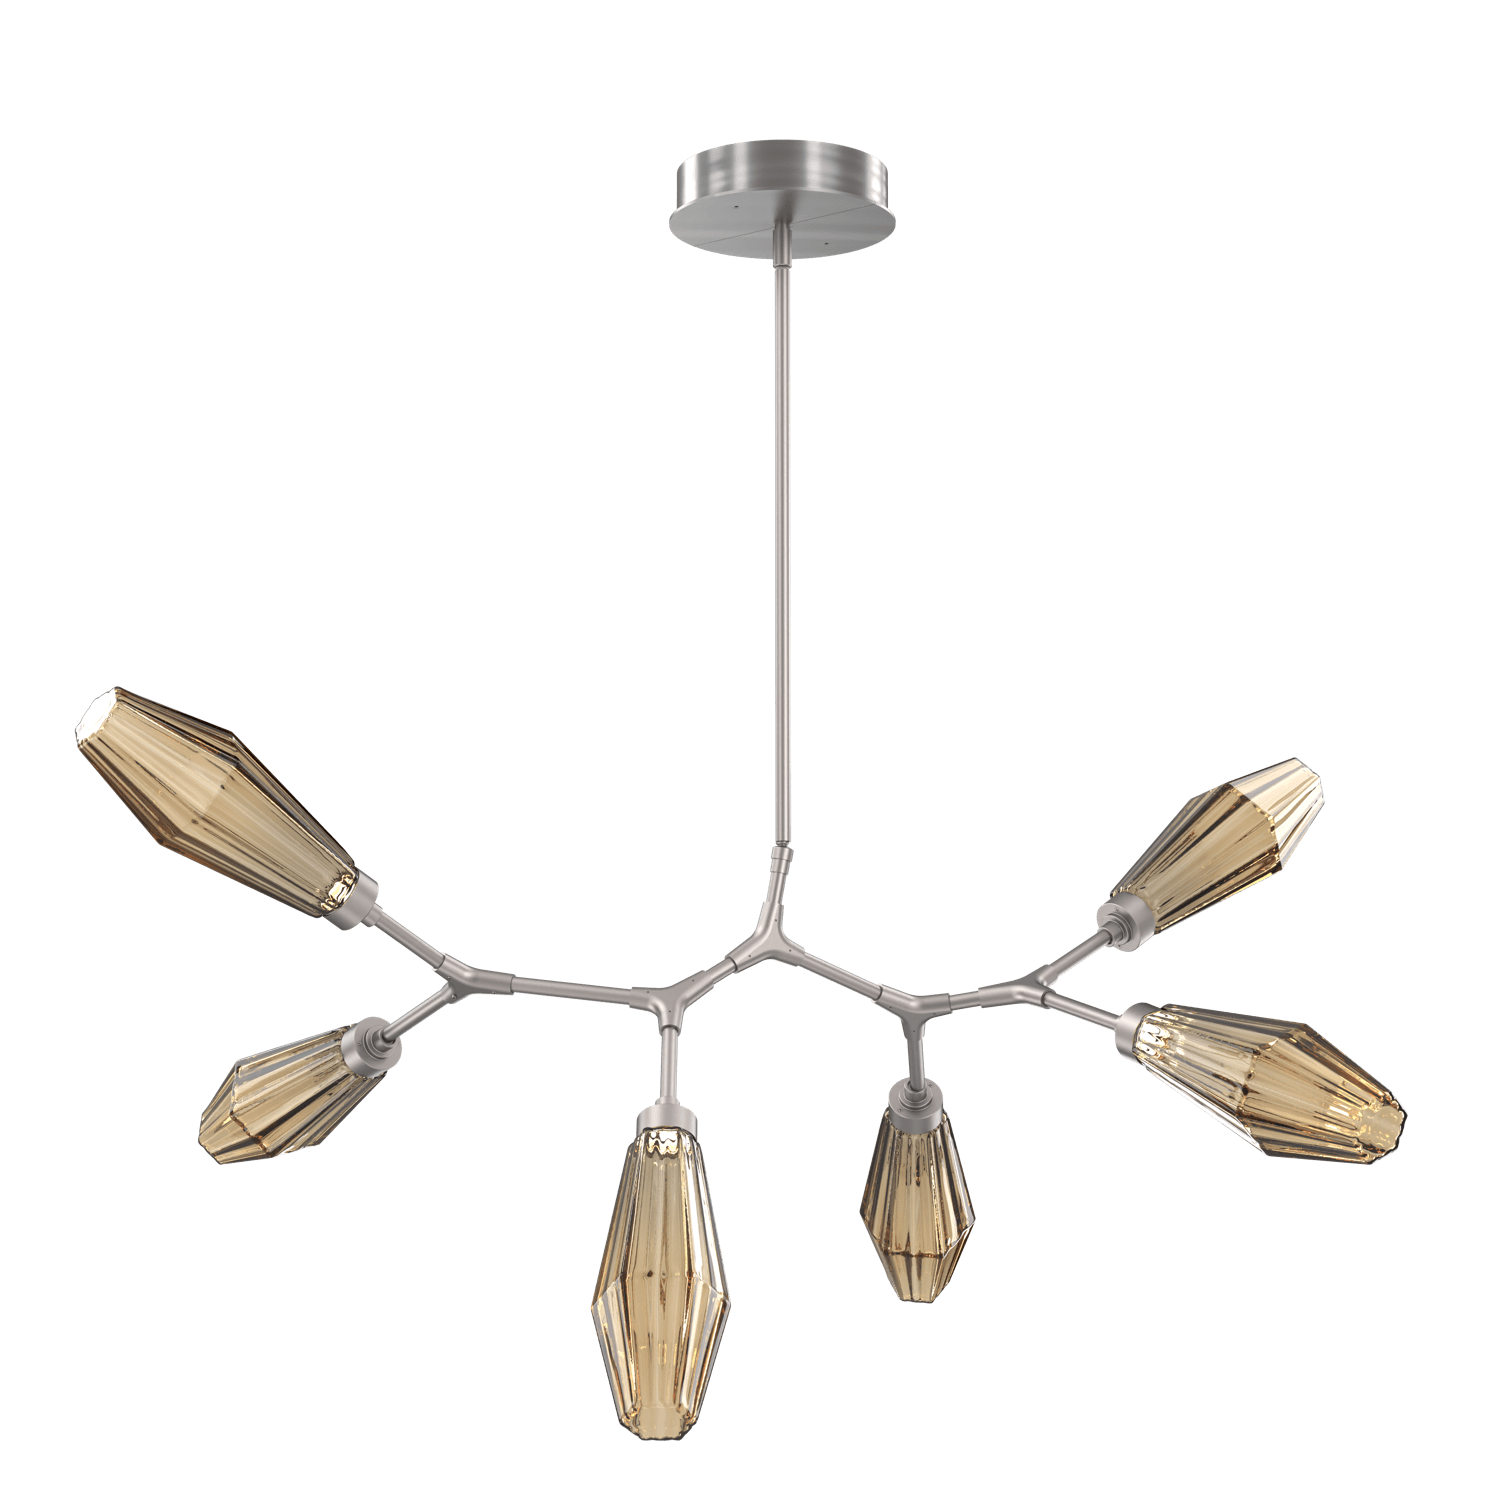 PLB0049-BA-SN-RB-Hammerton-Studio-Aalto-6-light-modern-branch-chandelier-with-satin-nickel-finish-and-optic-ribbed-bronze-glass-shades-and-LED-lamping